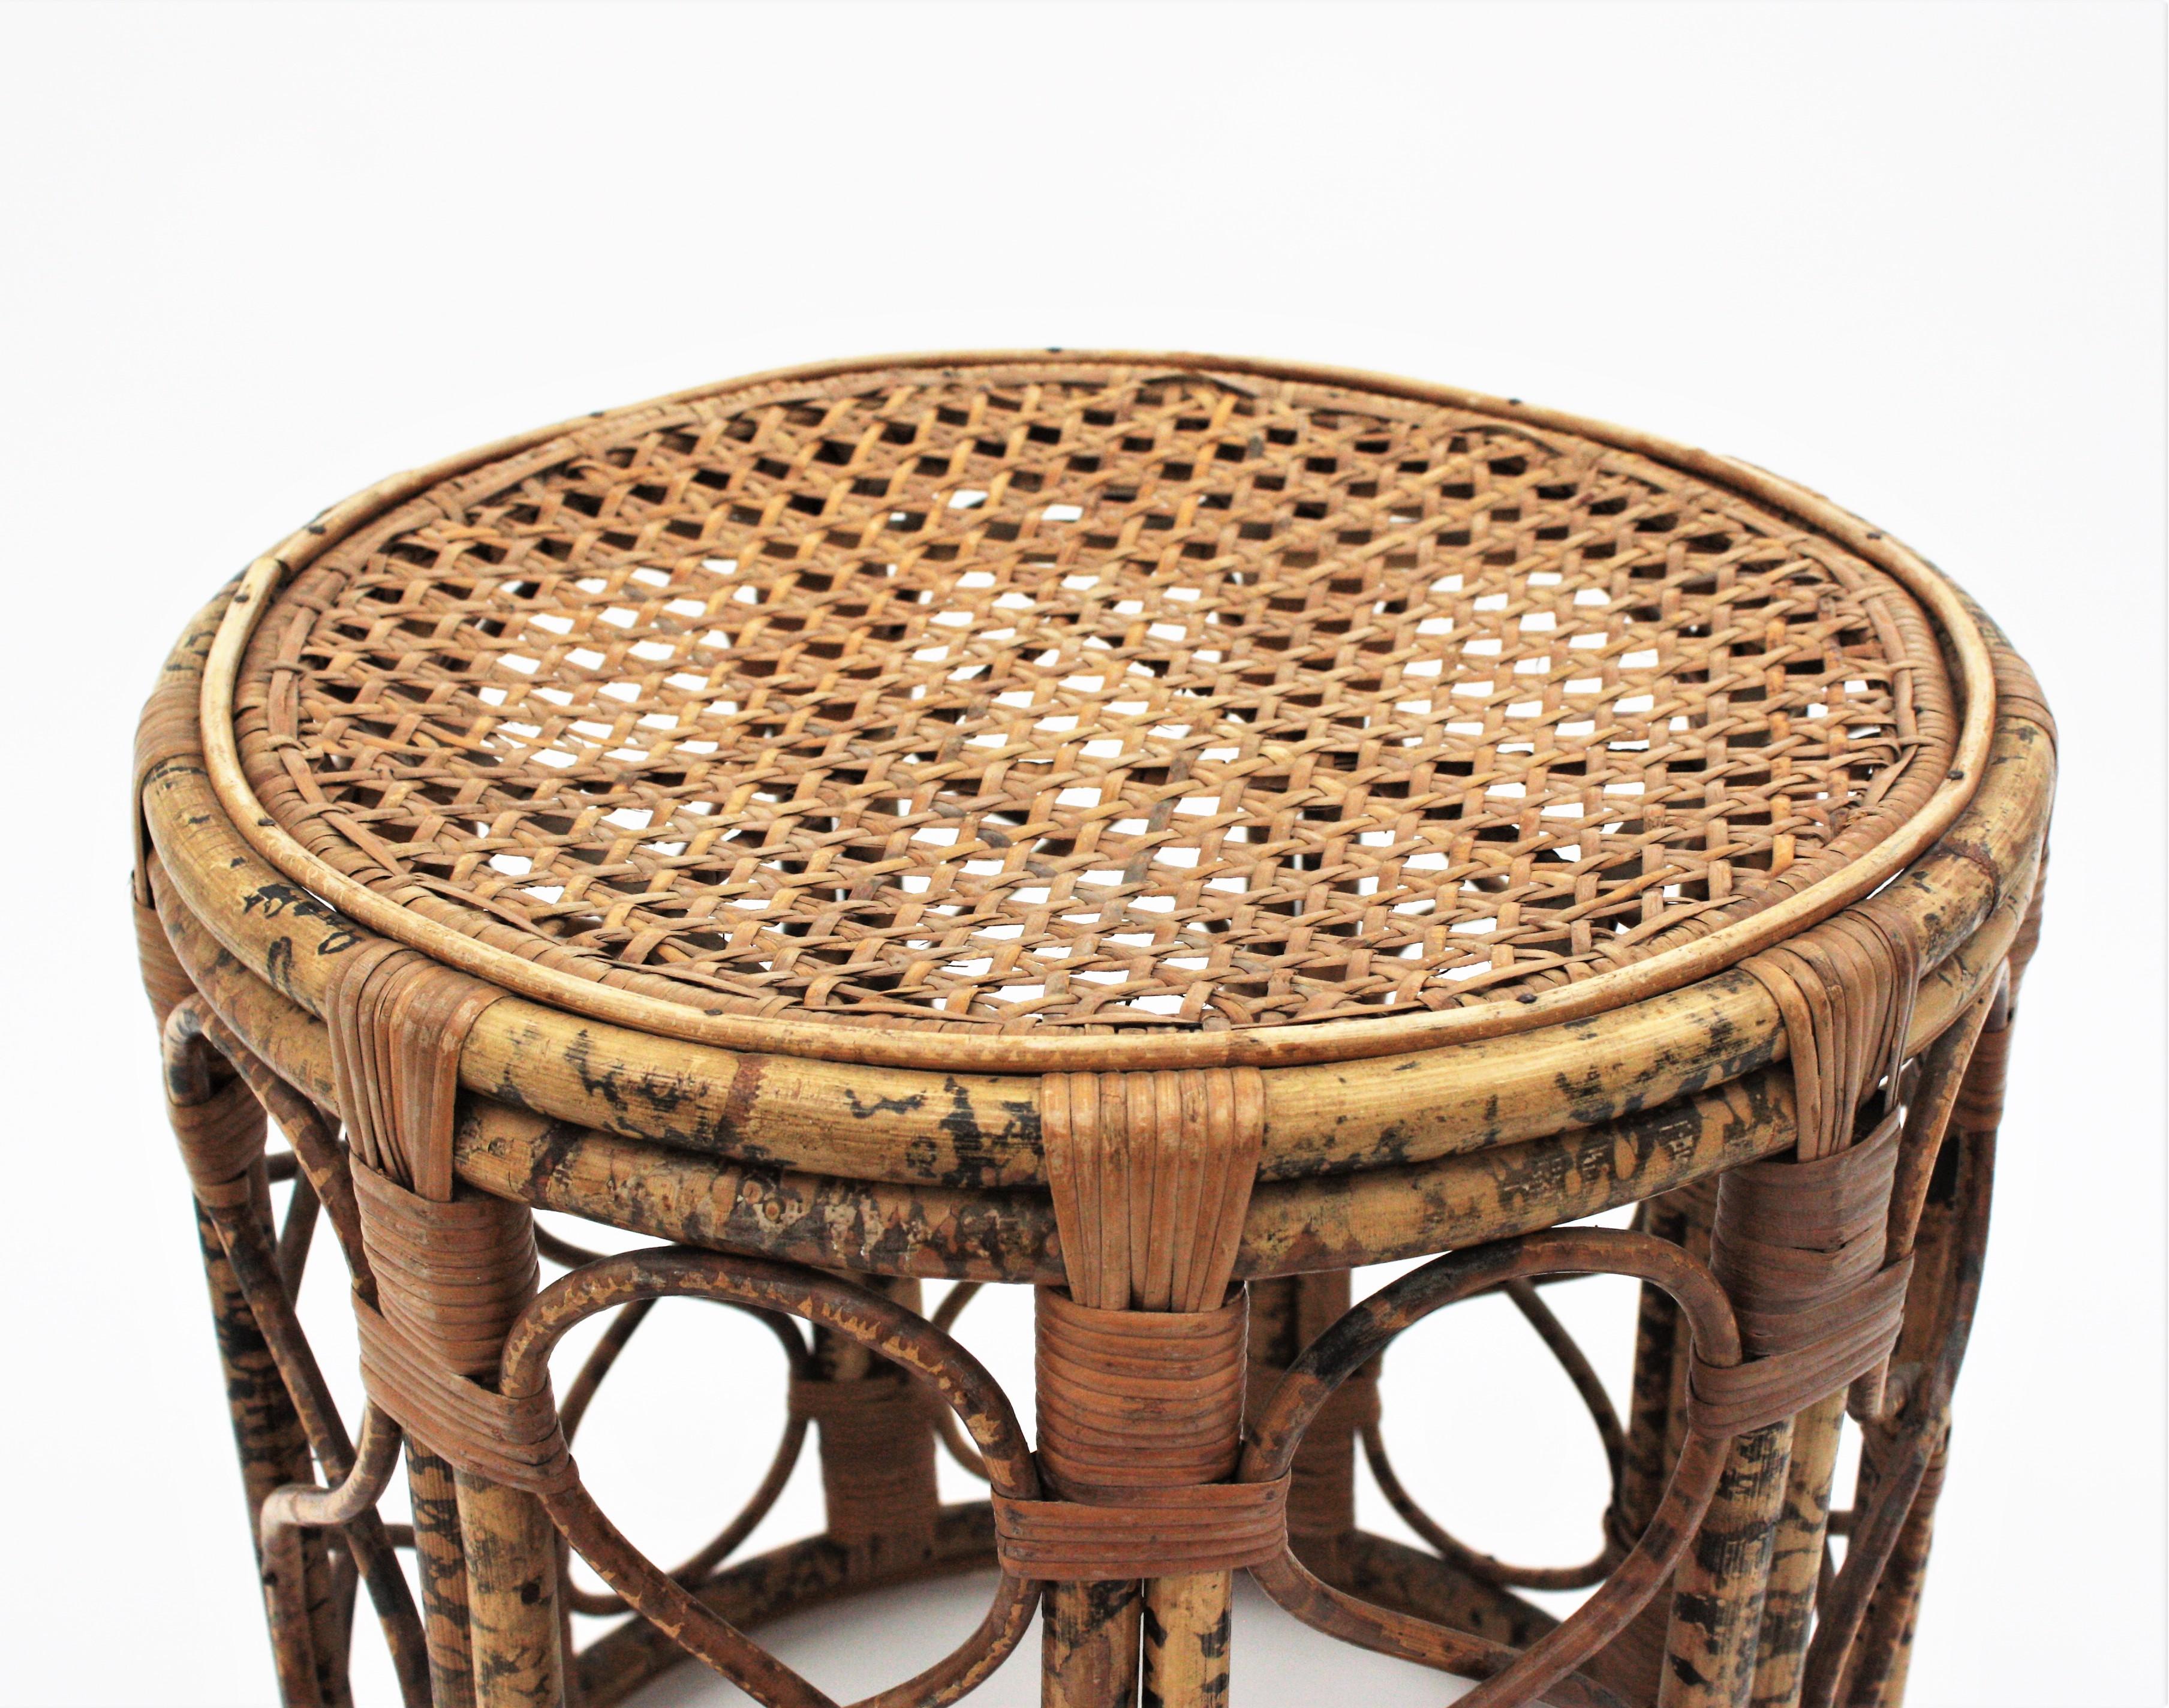 Hand-Crafted French Side Table or Stool in Tiger Bamboo Rattan with Woven Wicker Top, 1940s For Sale